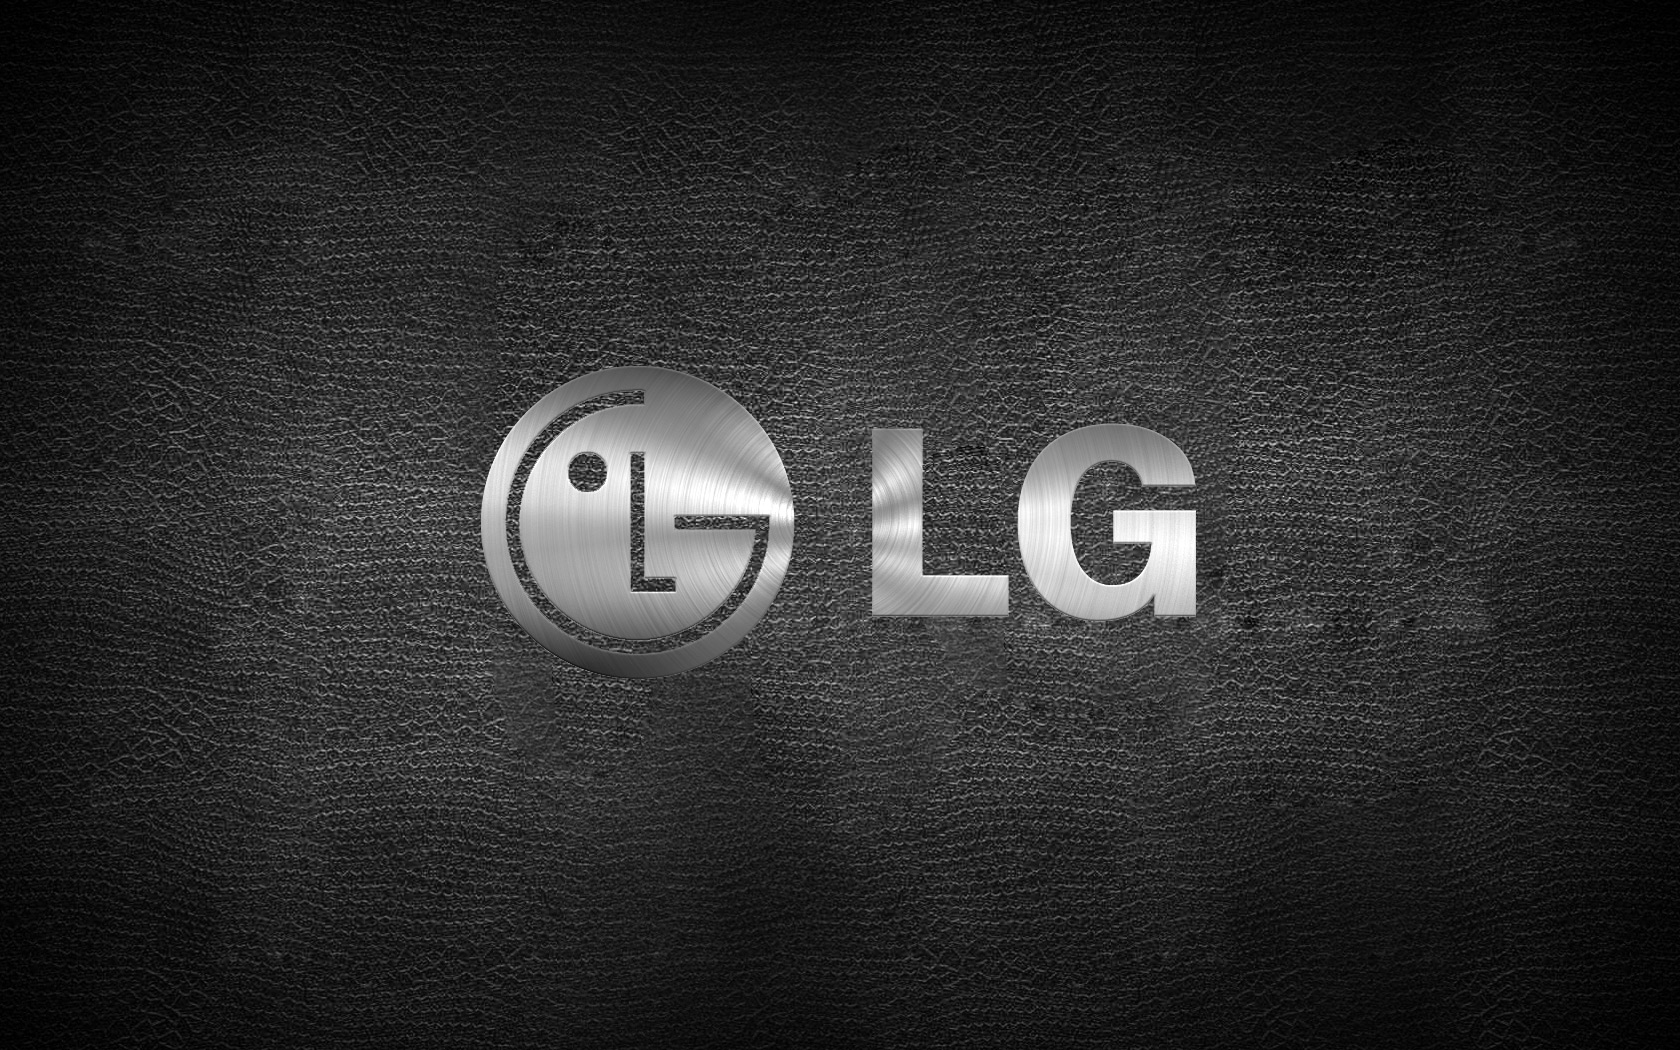 Wallpapers Lg Hd For 1680x1050 | #697330 #lg